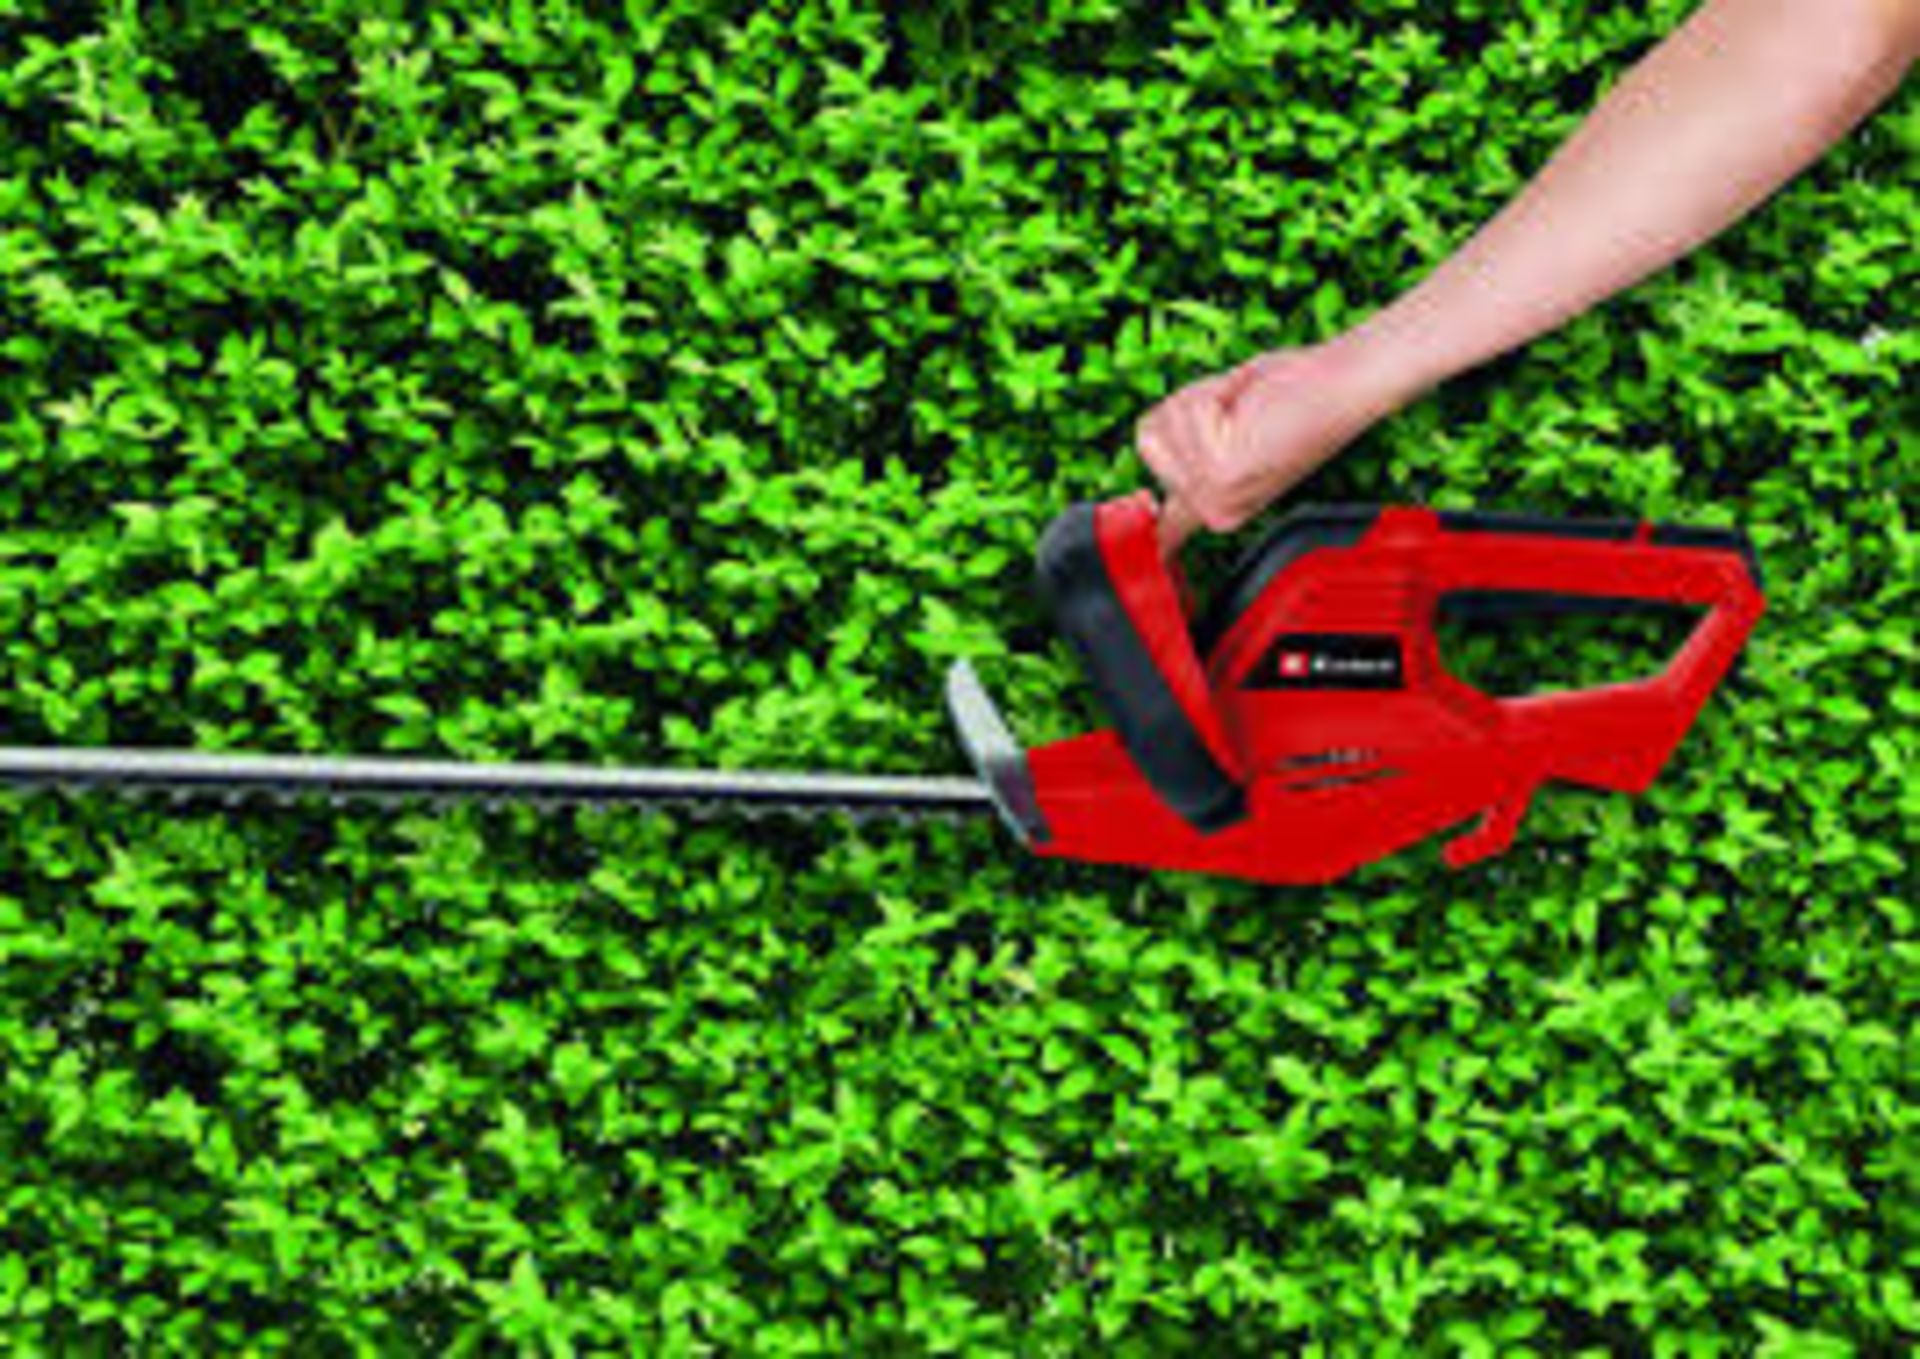 Boxed Einhell Classic Electric Hedge Trimmer Tested Working - Image 2 of 4